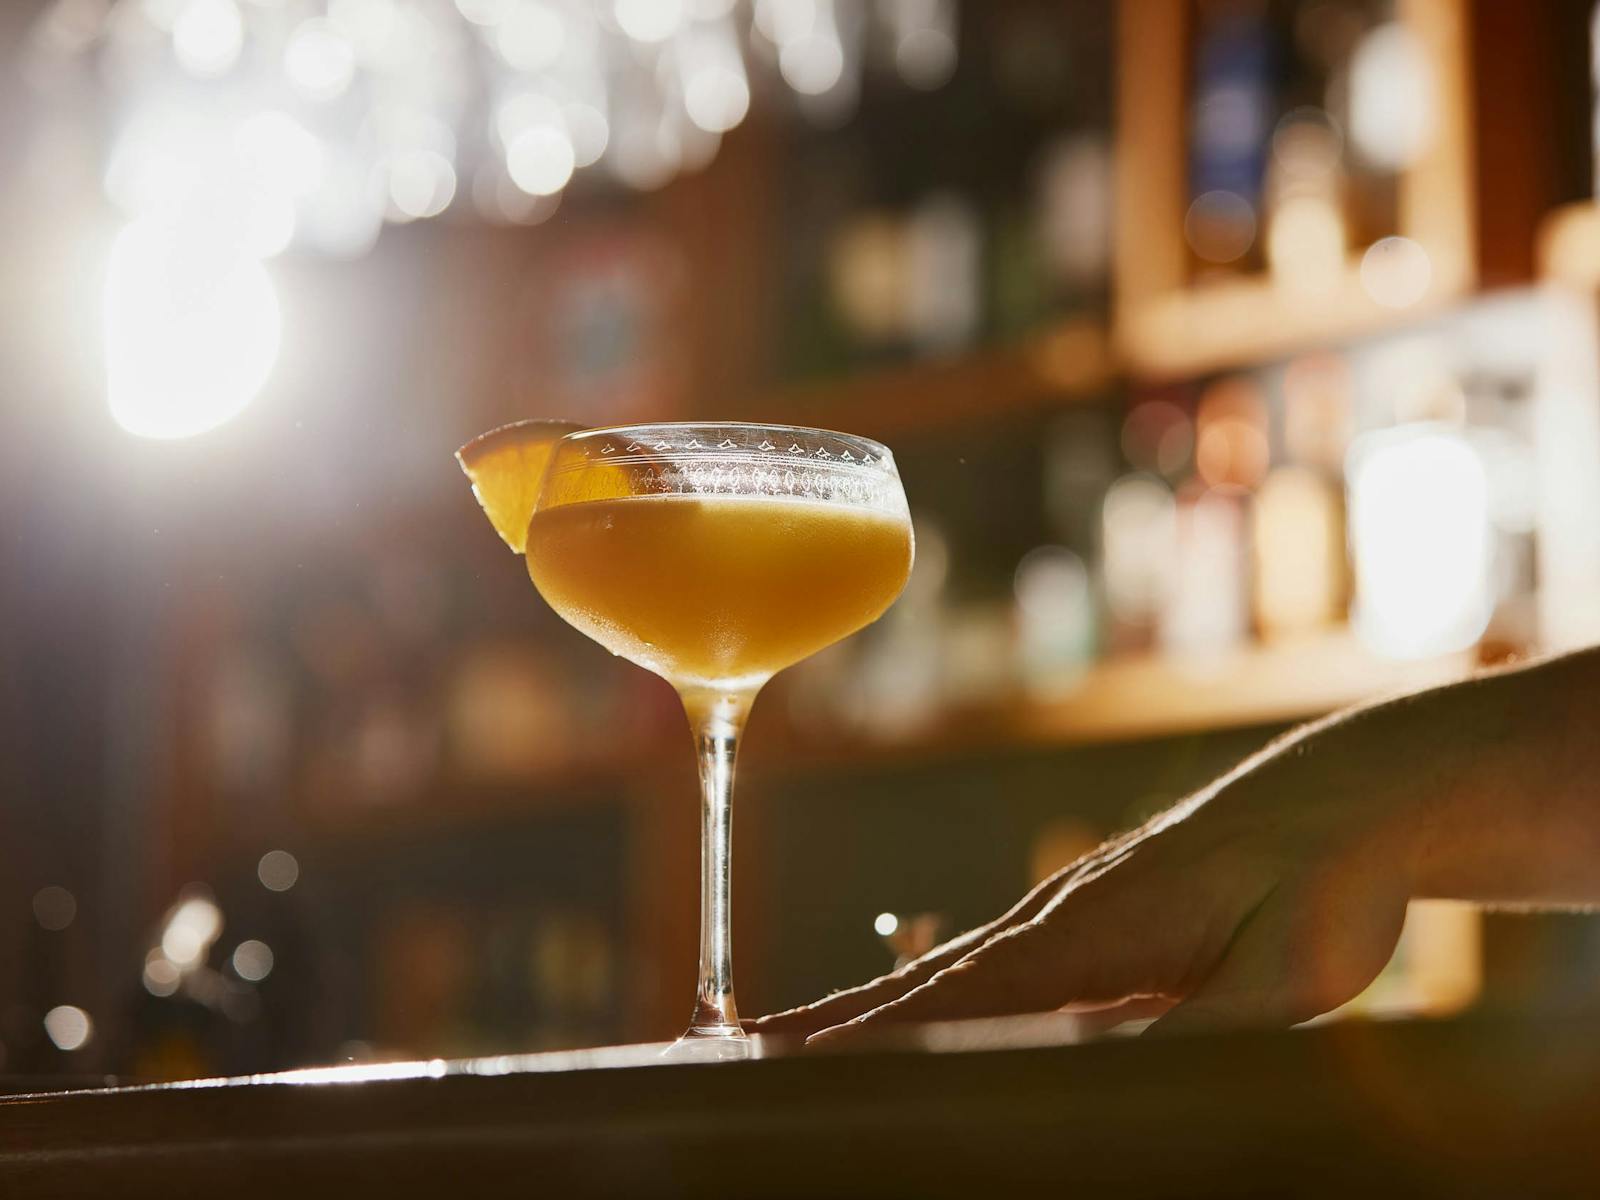 A bartender sliding a Sidecar cocktail across a counter, garnished with an orange slice